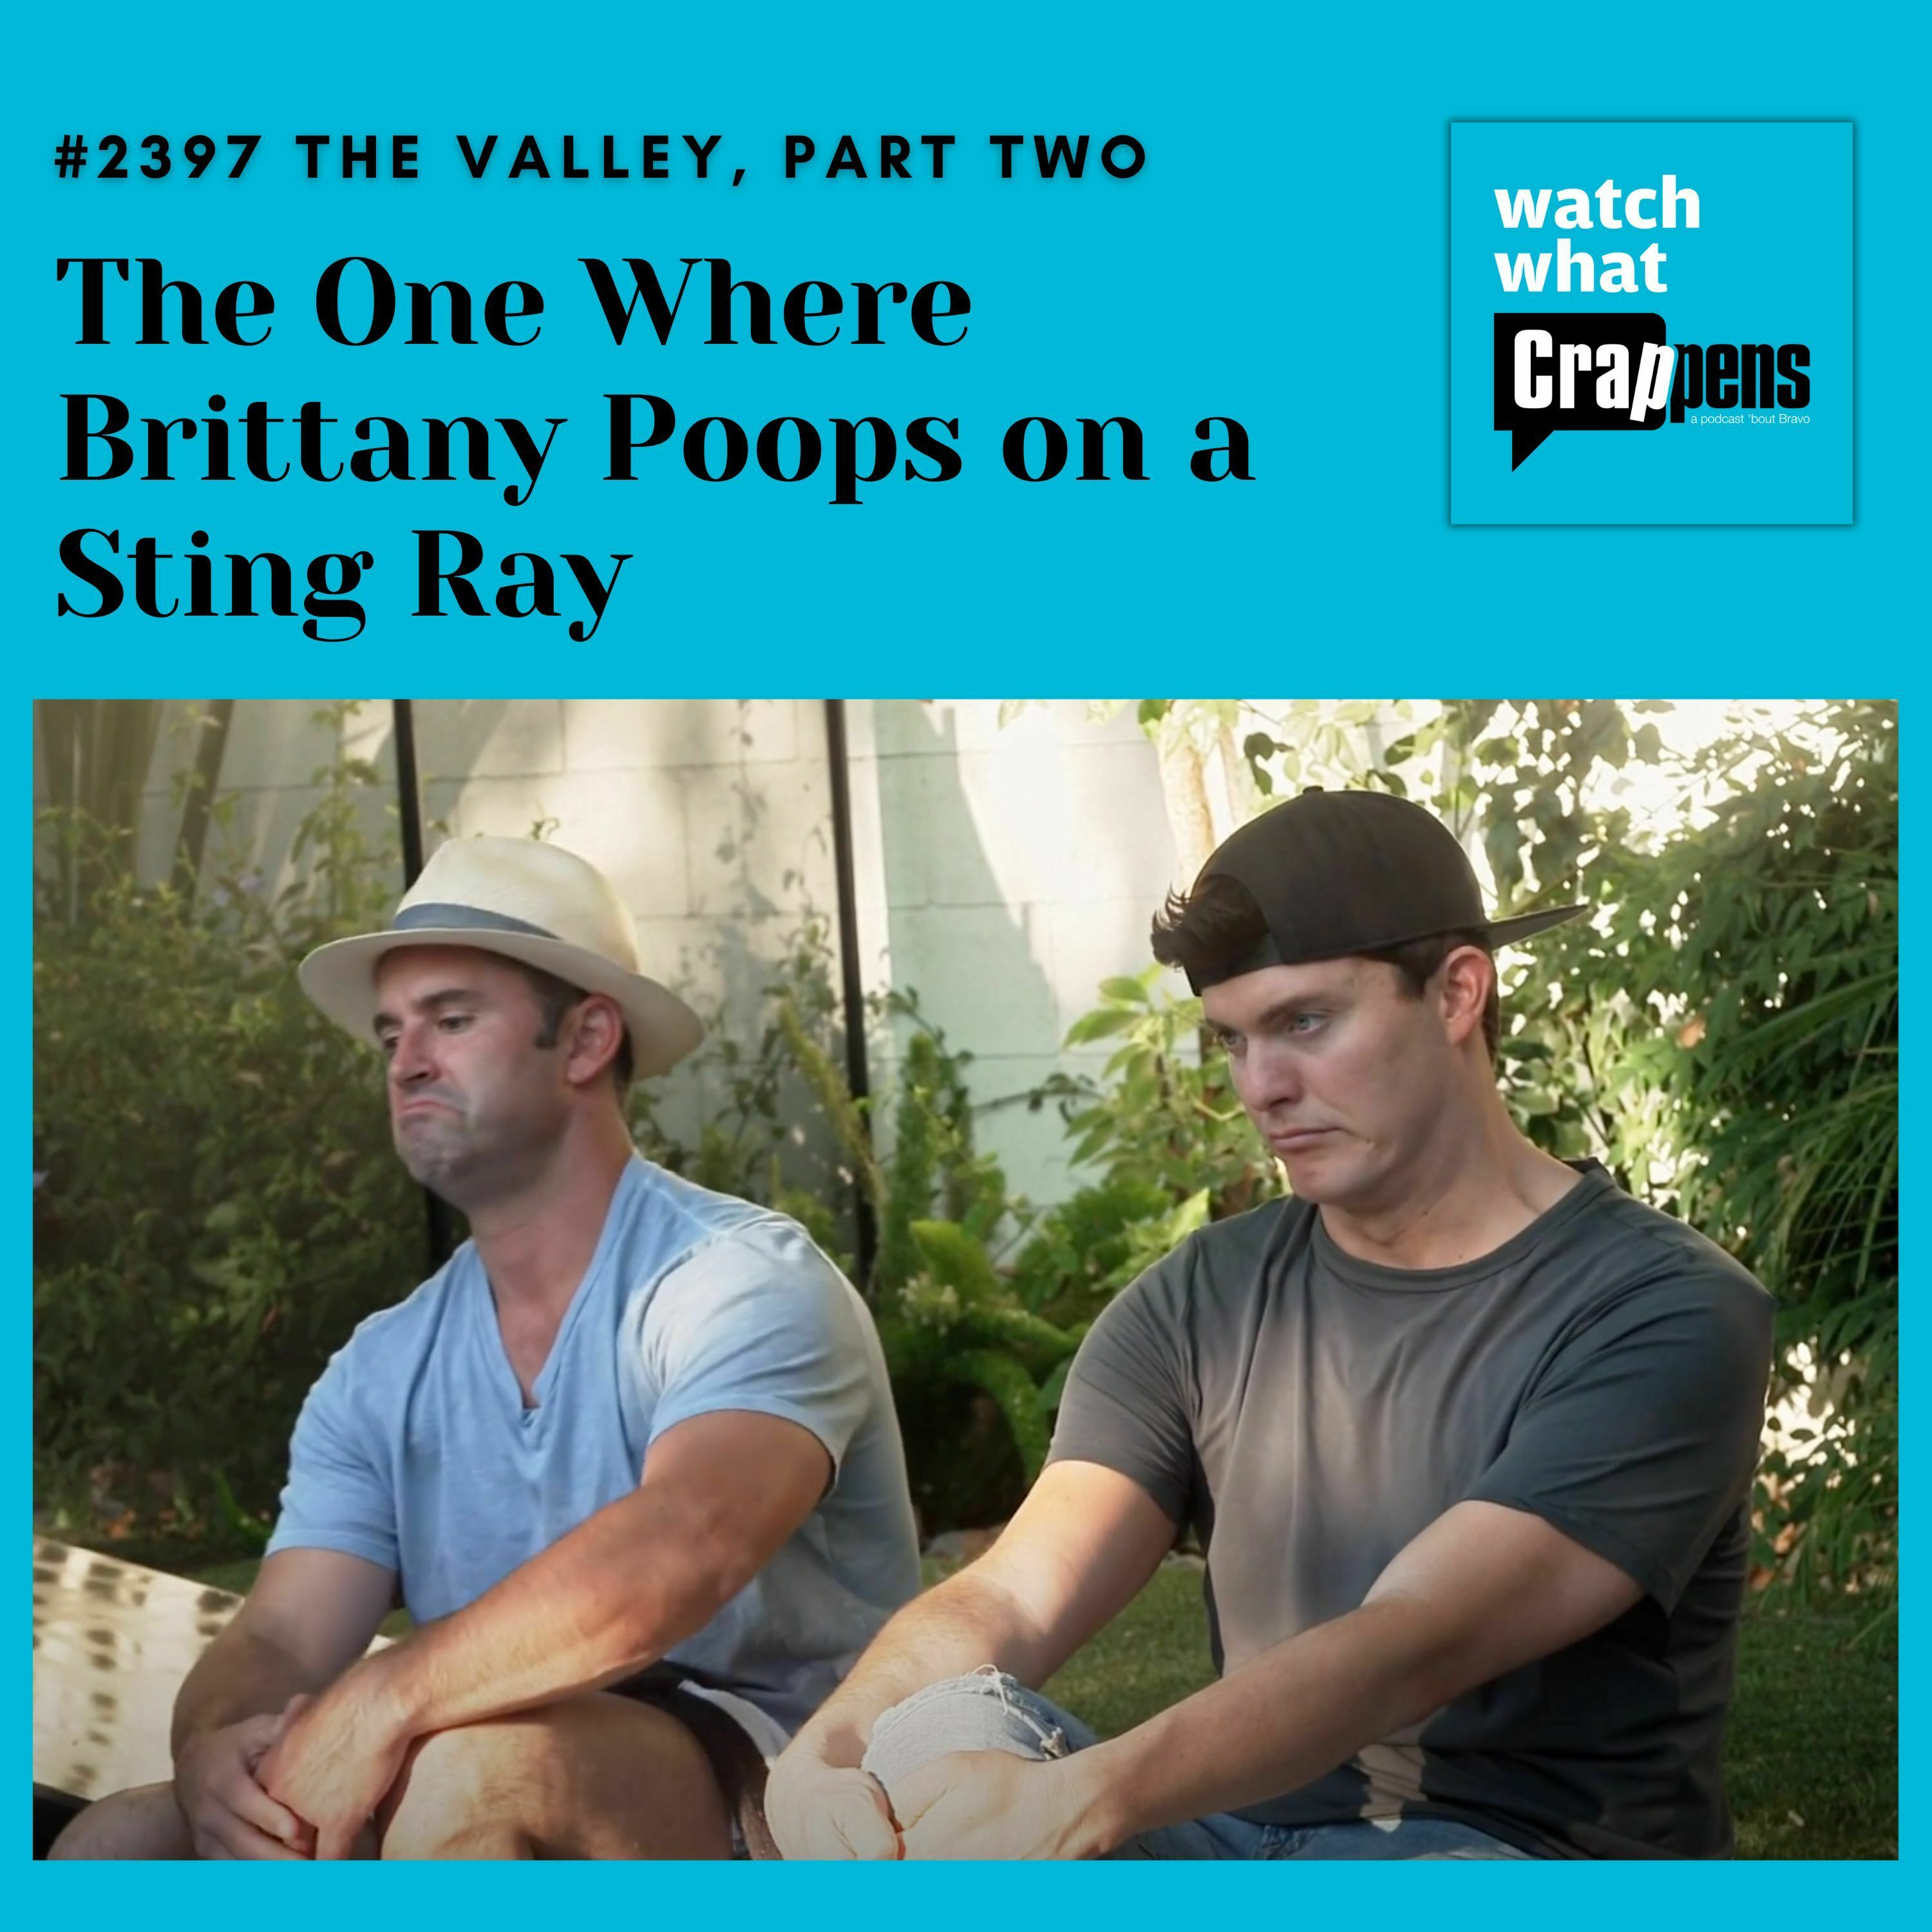 # 2397 The Valley, Part Two: The One Where Brittany Poops on a Sting Ray